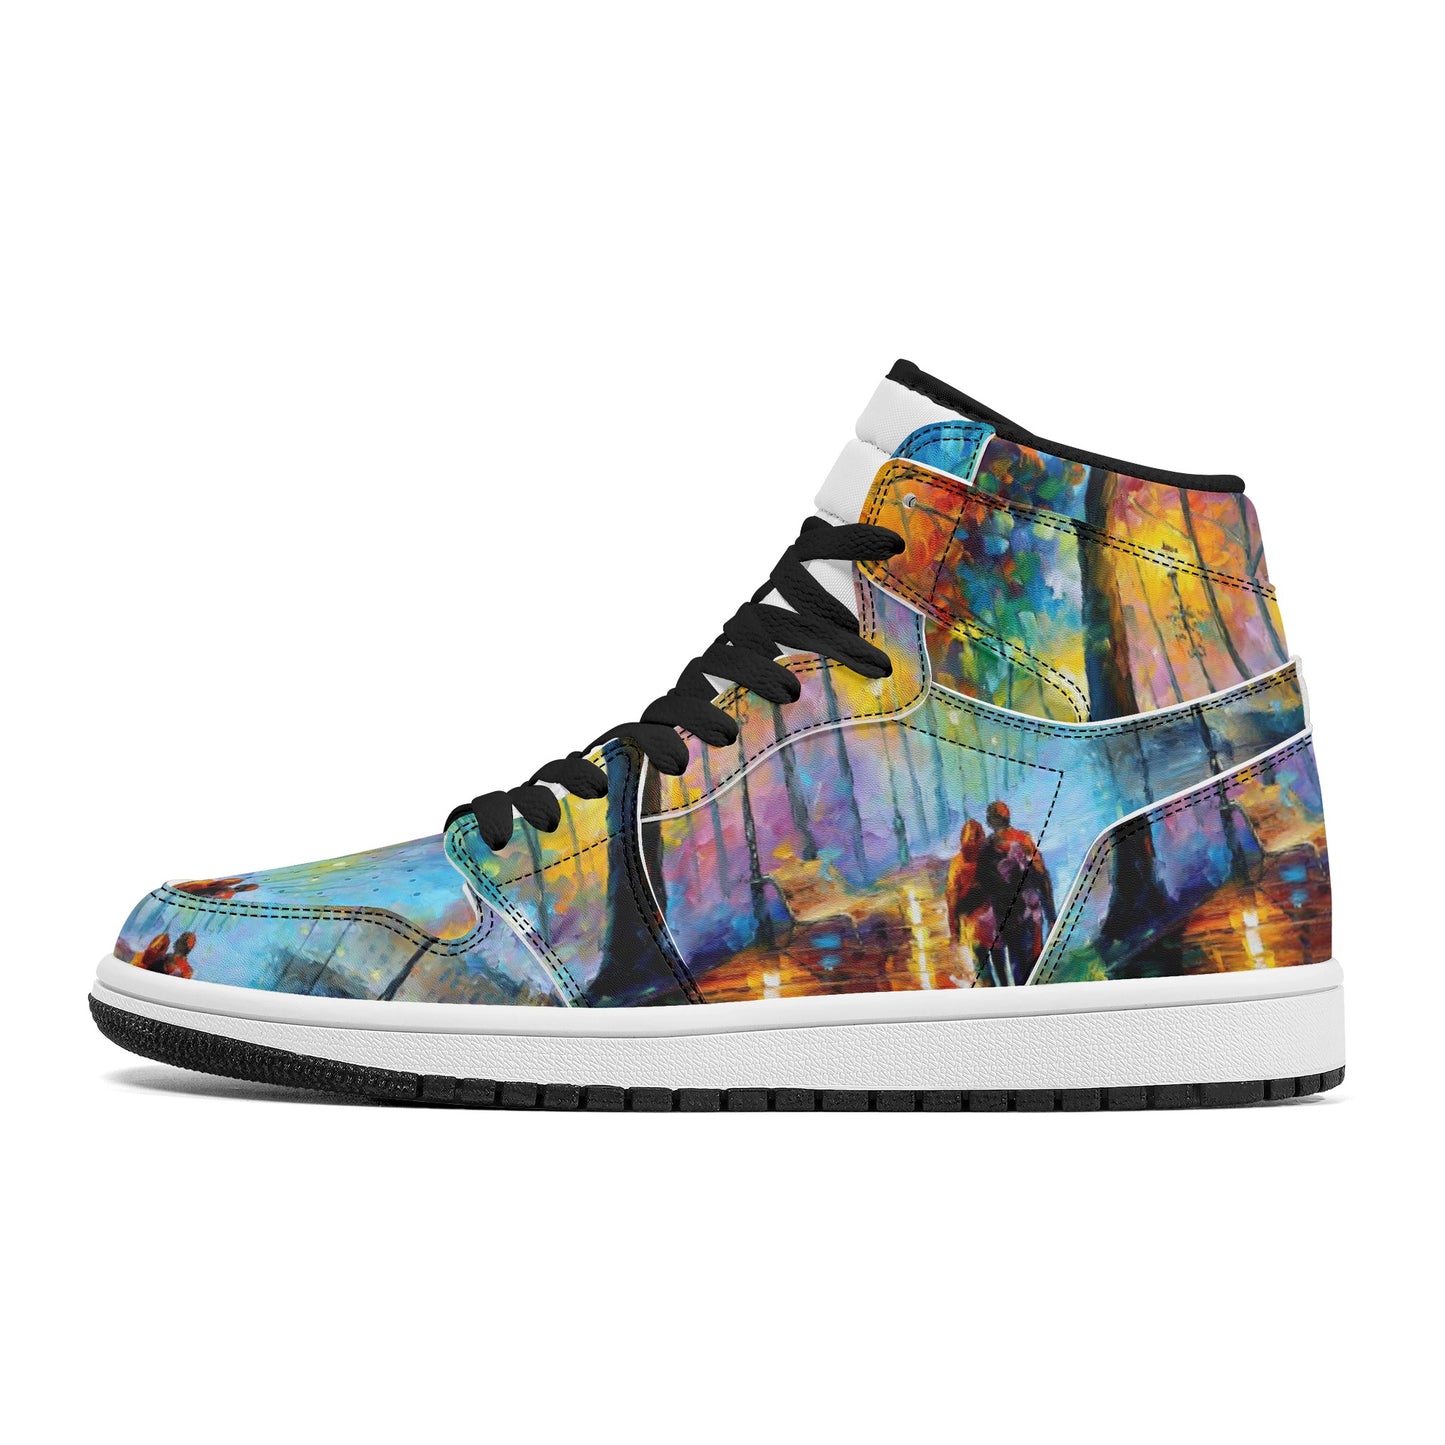 Women's High Top Skateboard Sneakers Afremov Melody of The Night